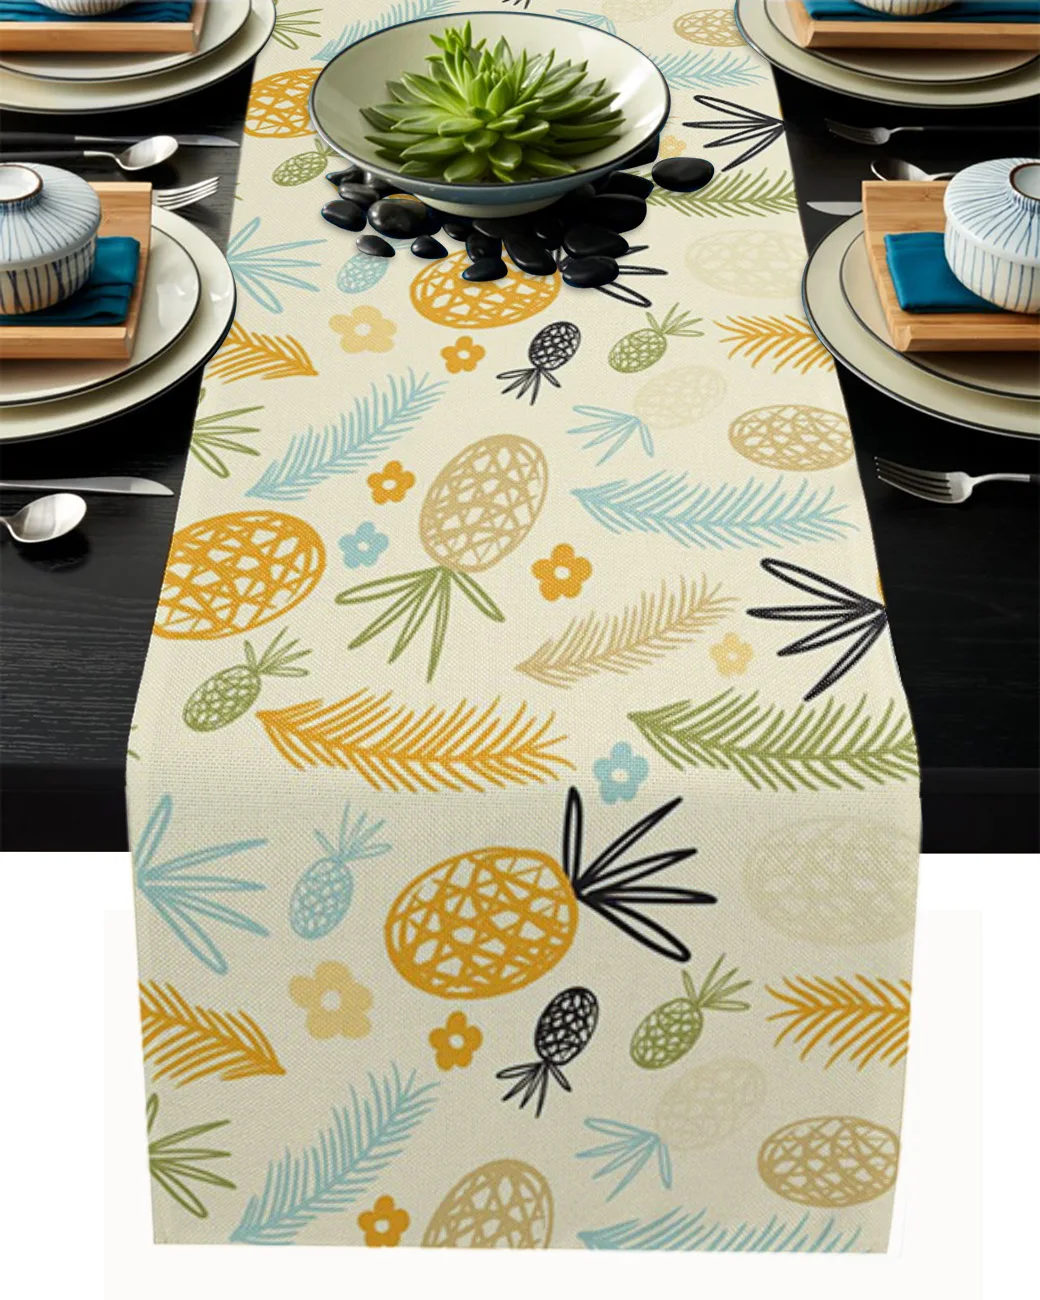 

Pineapple Yellow Art Summer Table Runner Party Wedding Centerpieces for Tables Home Hotel Decor Kitchen Dining Tablecloth